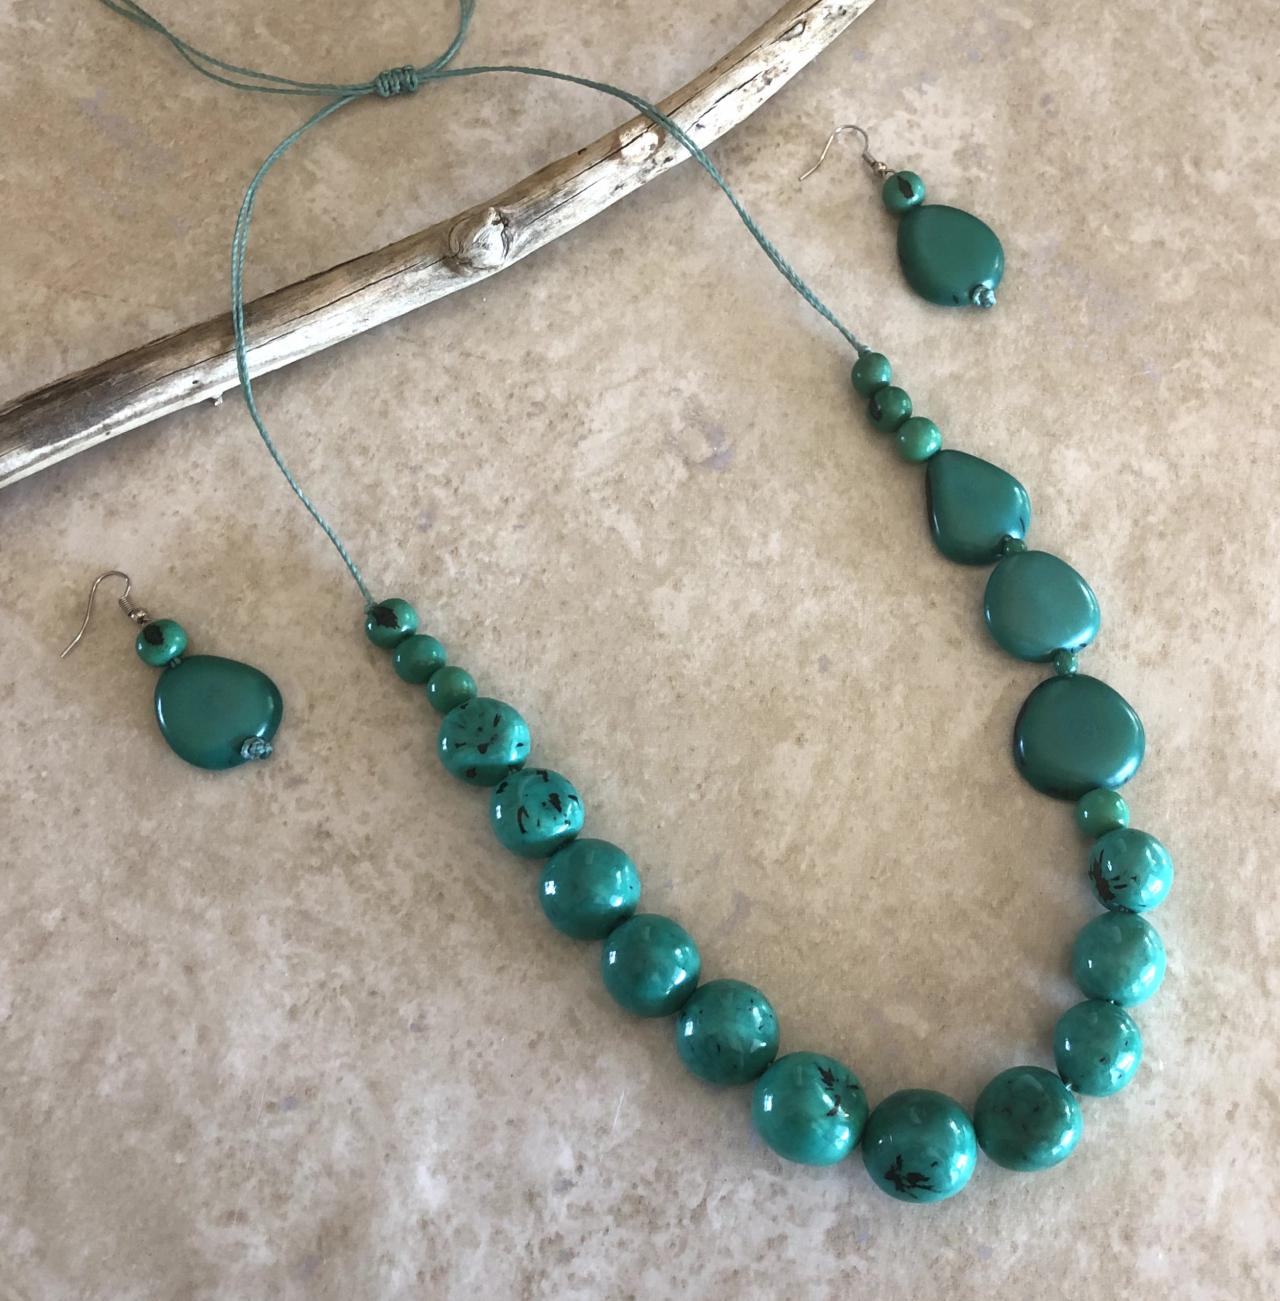 Jade Green Bombona And Tagua Nut Necklace Earrings,statement Necklace,long Necklace, Chunky, Vegan Necklace, Exotic